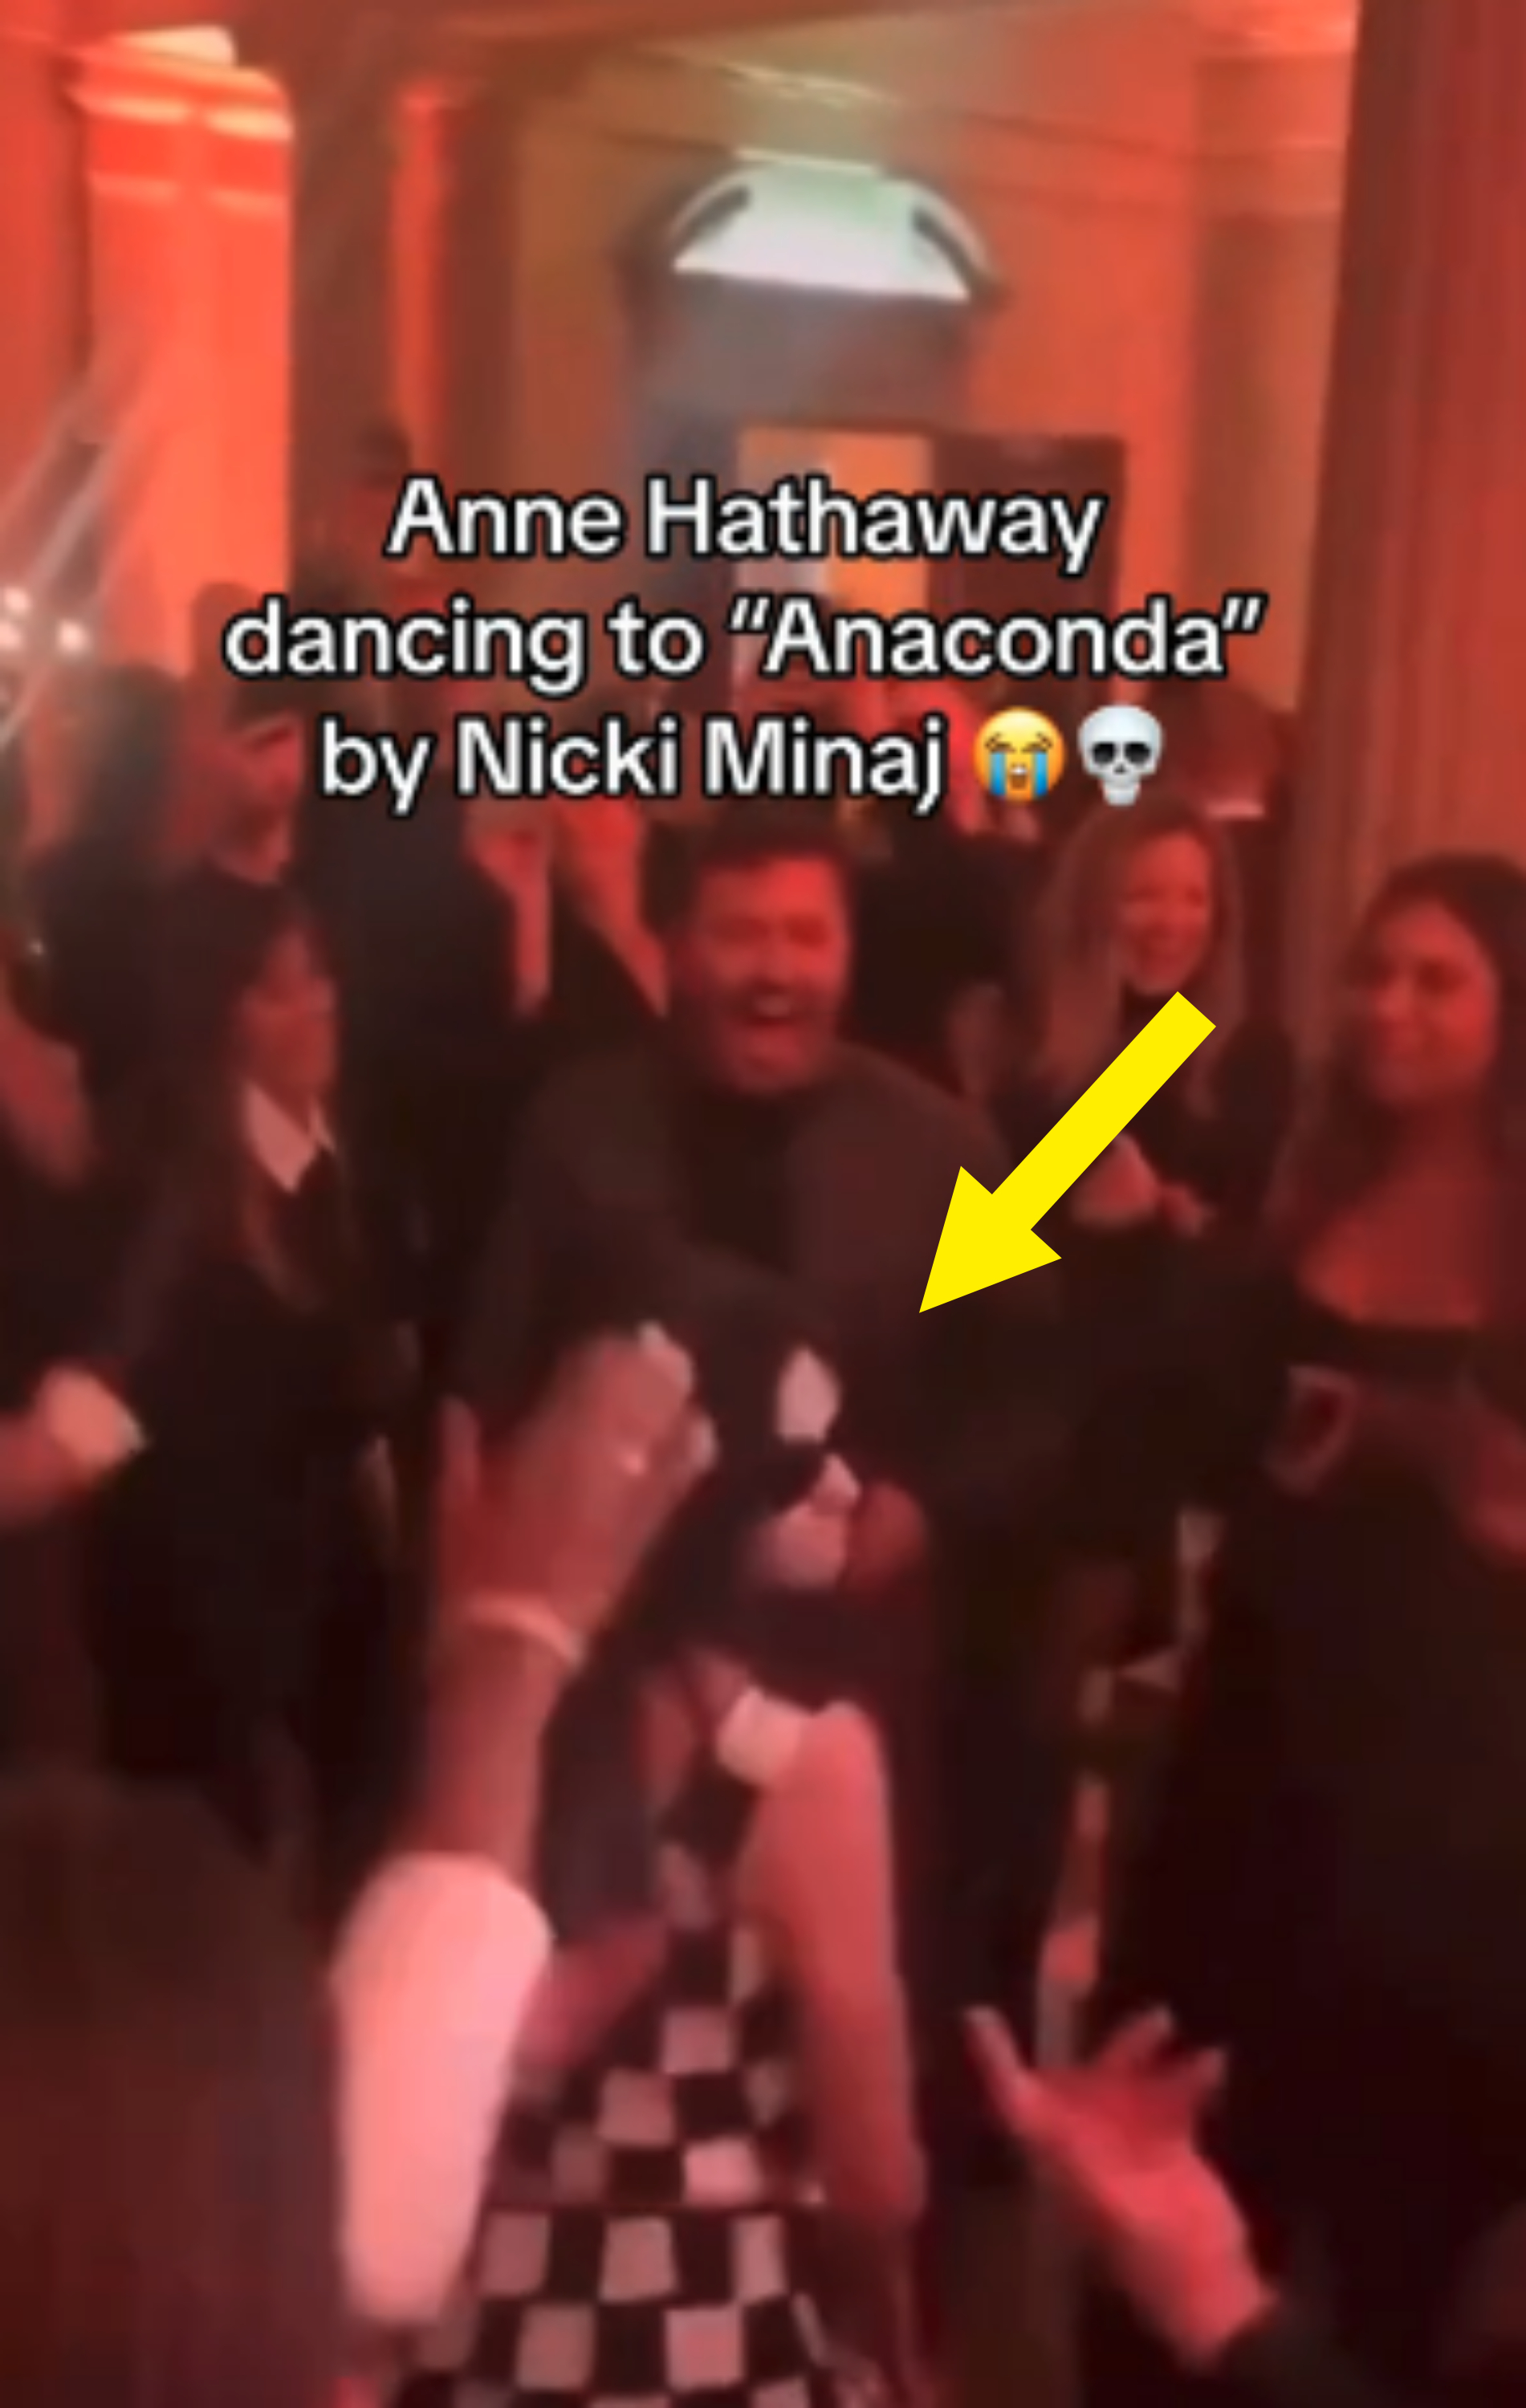 Anne Hathaway dancing to &quot;Anaconda&quot; by Nicki Minaj in a lively event surrounded by people